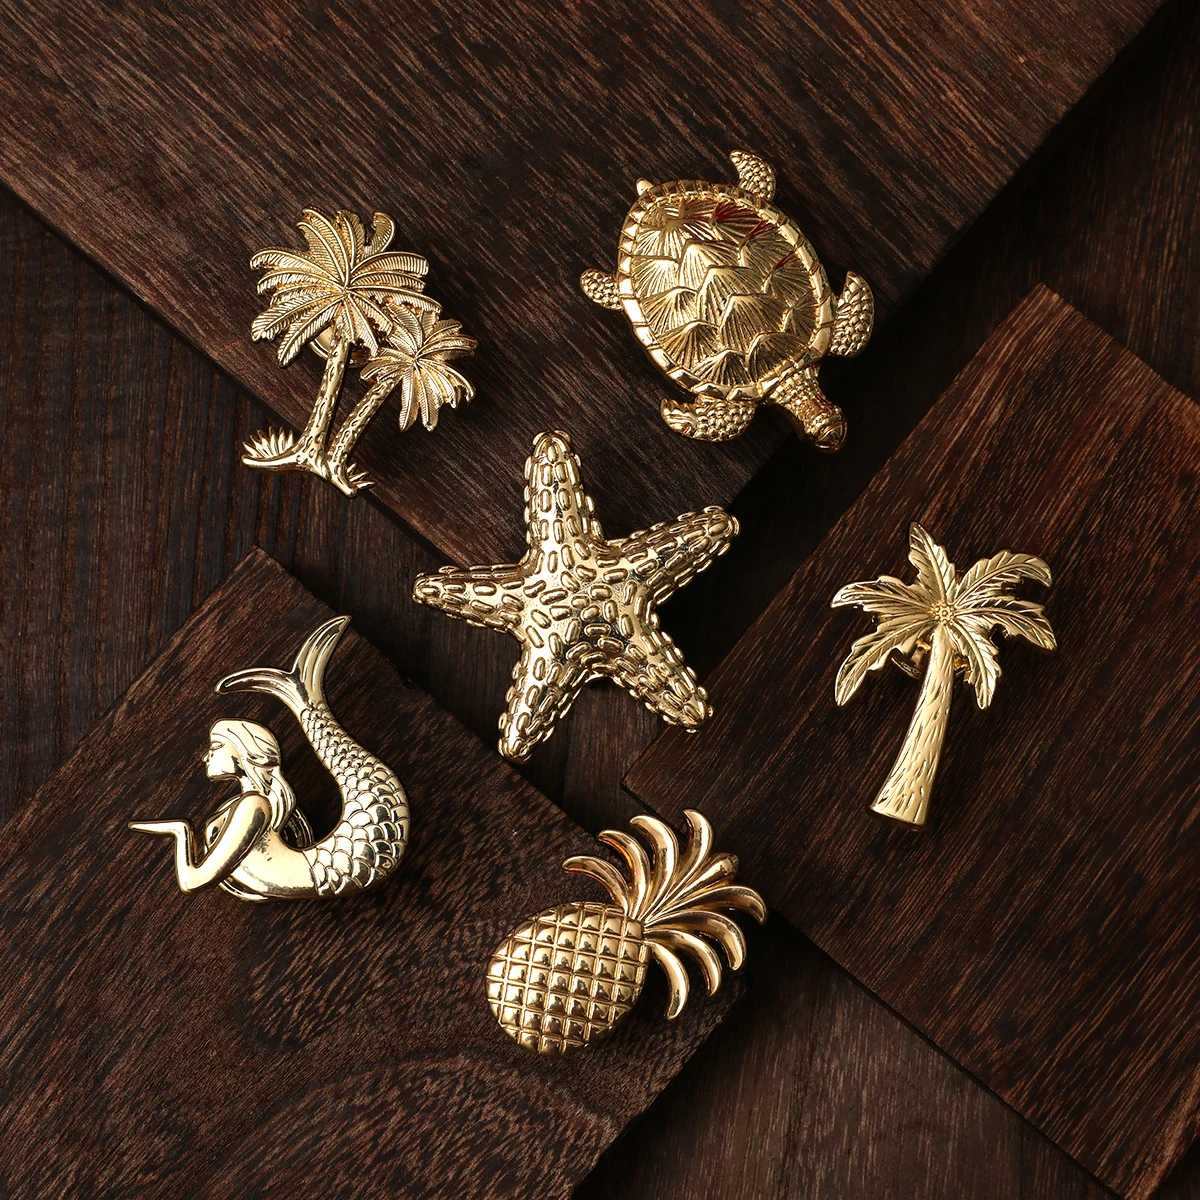 Plant Animal Shape Furniture Handles Color Drawer Knobs Retro Dresser Knobs Gold Handles for Cabinets and Drawers